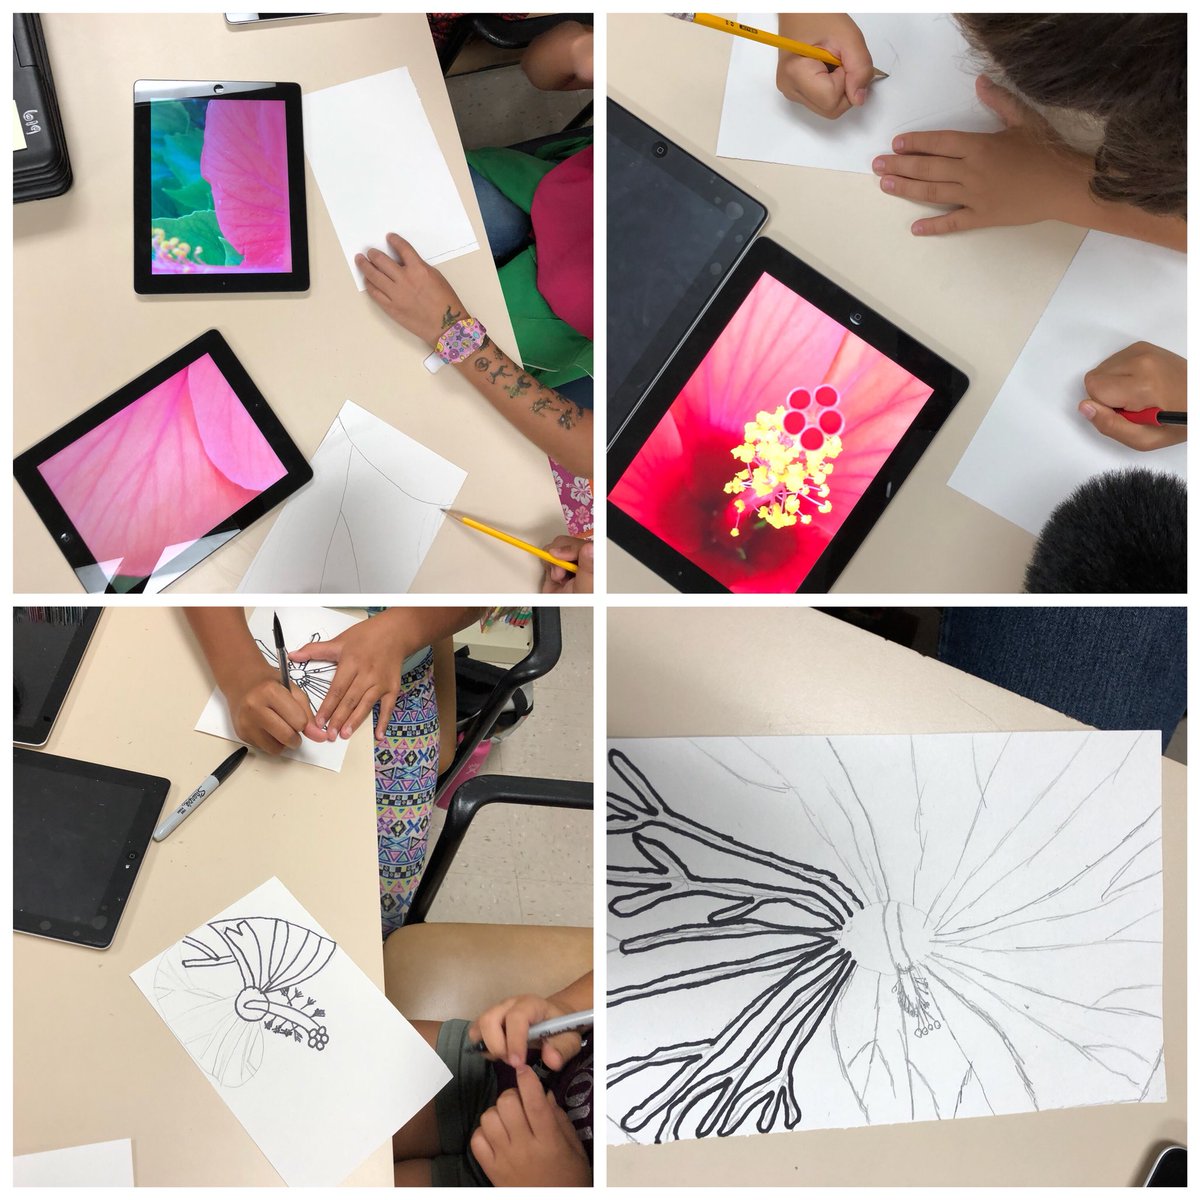 We be artin’ like O’Keeffe today! The kids took some AH-MAZING pictures of nature! In the process of getting it to paper. #artaroundtheworld #summerschool